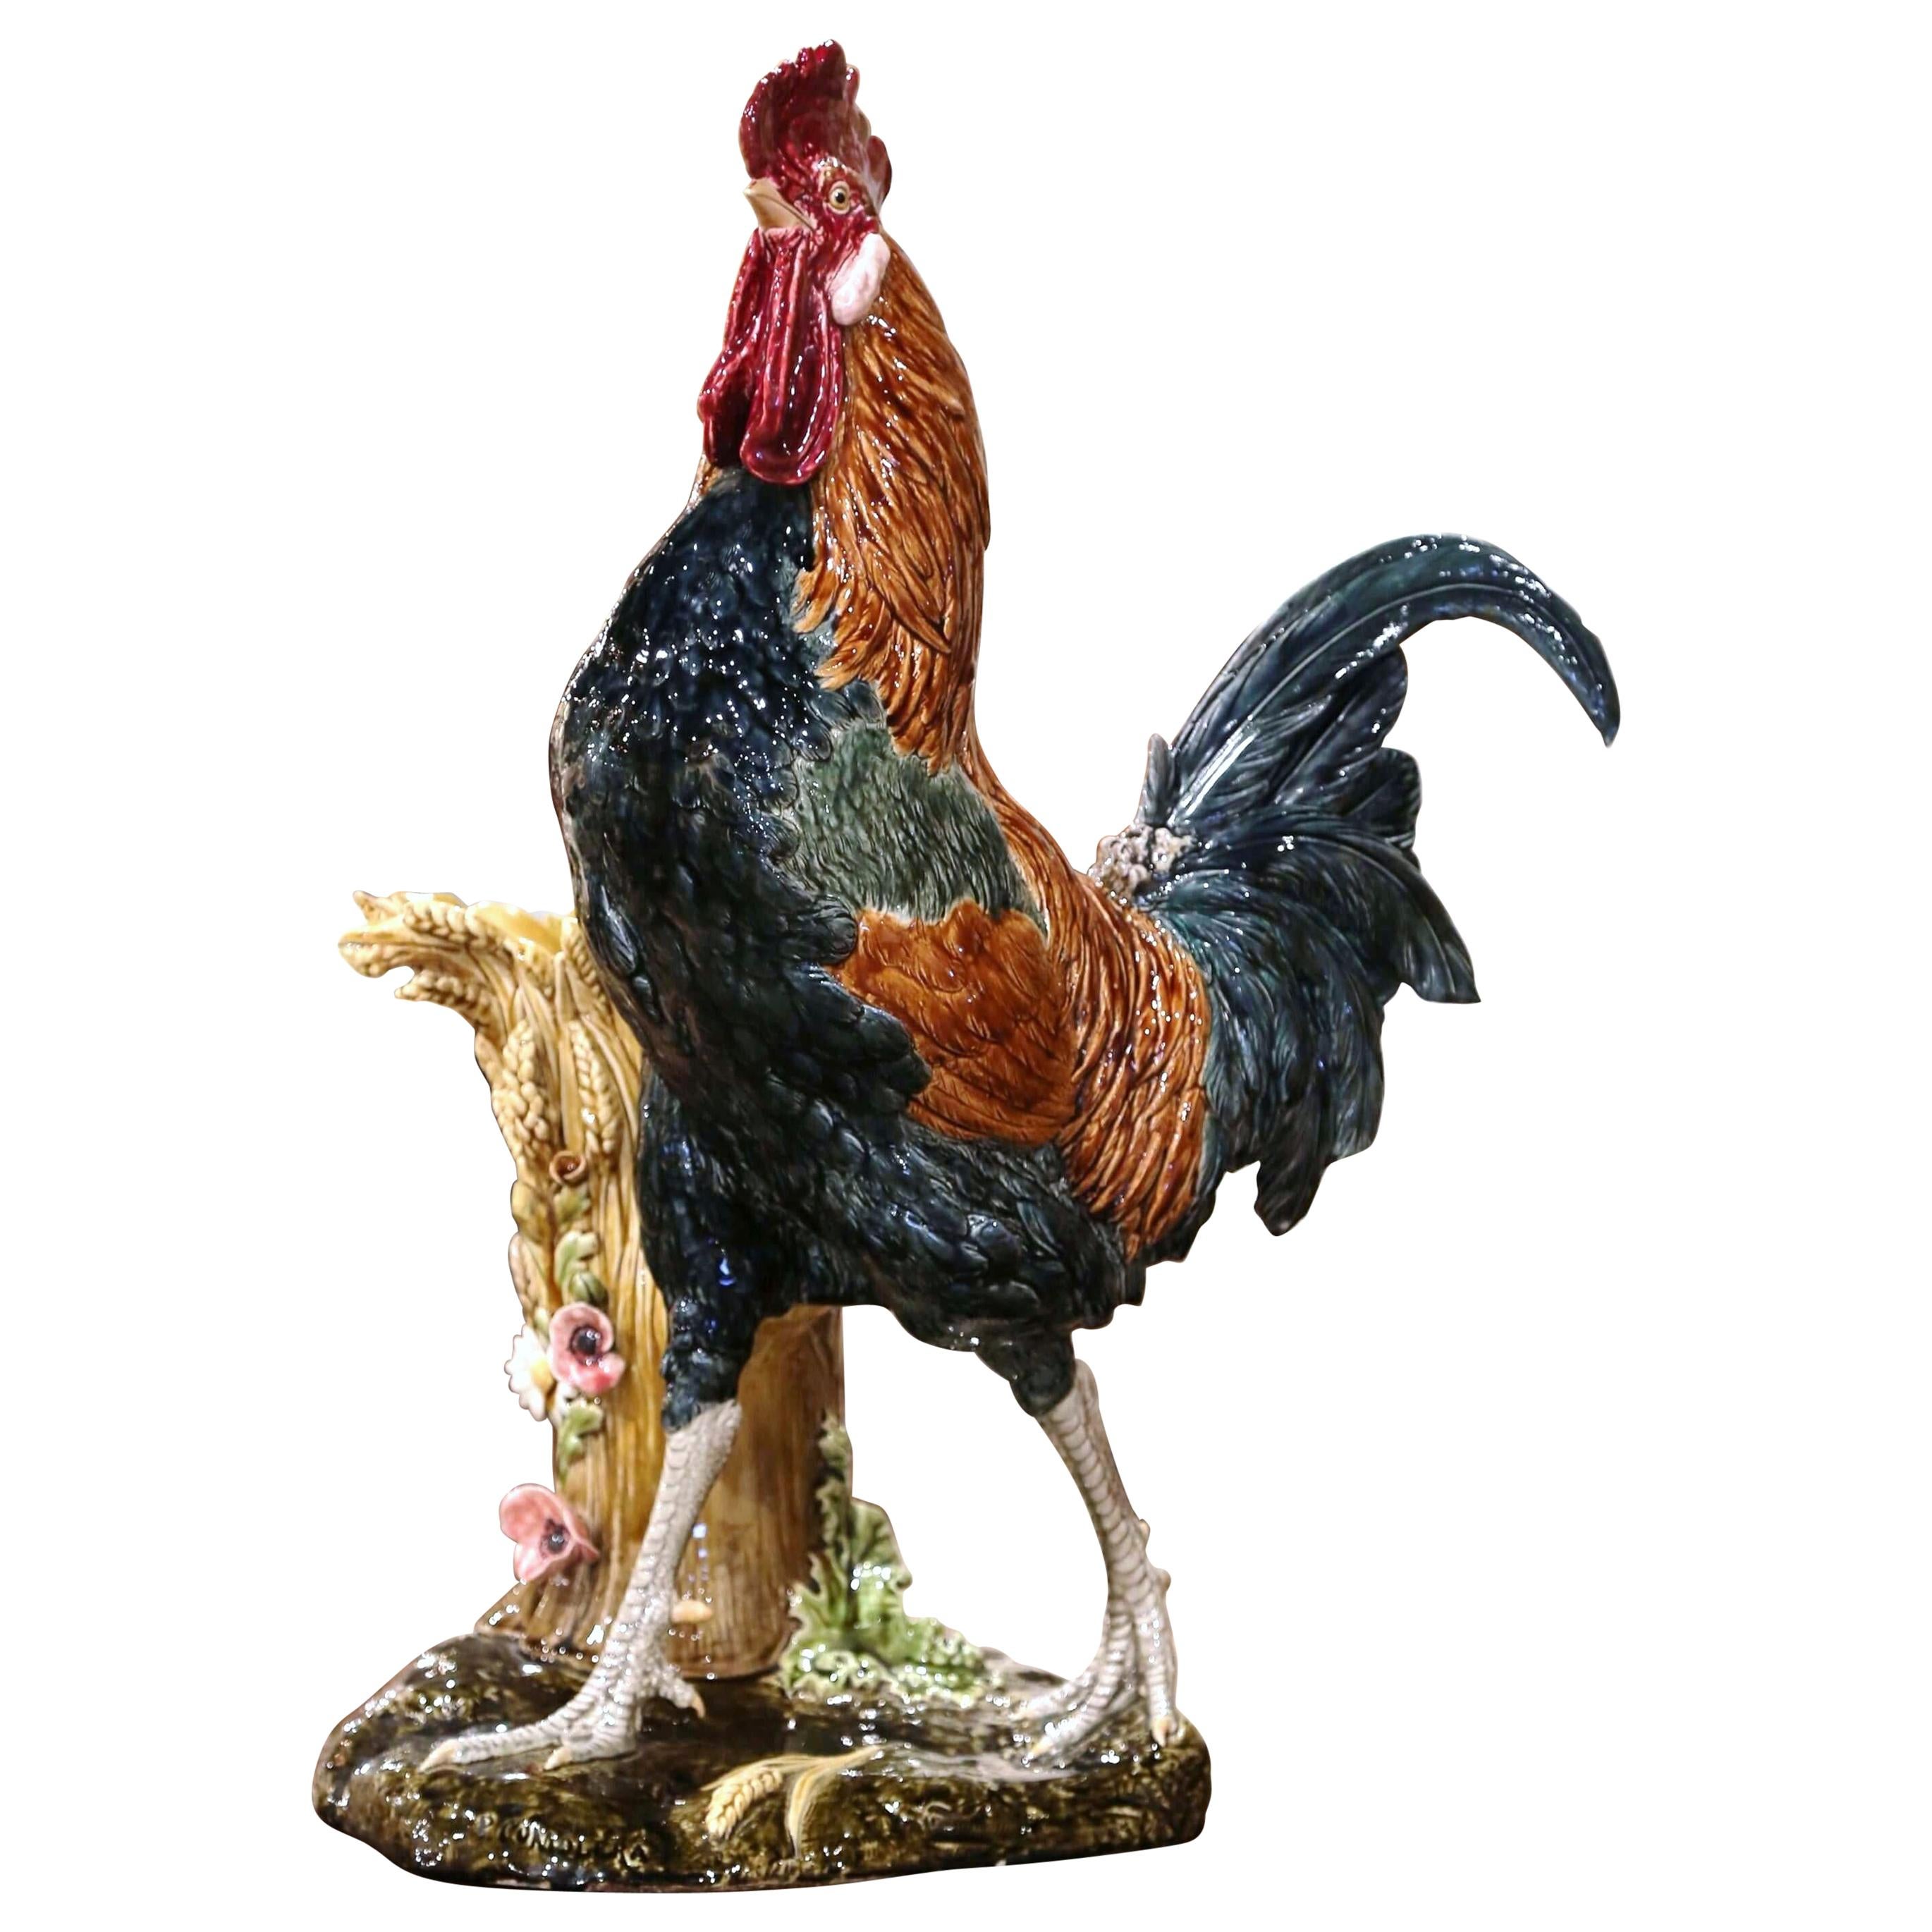 19th Century French Painted Faience Rooster with Vase Signed Paul Comolera